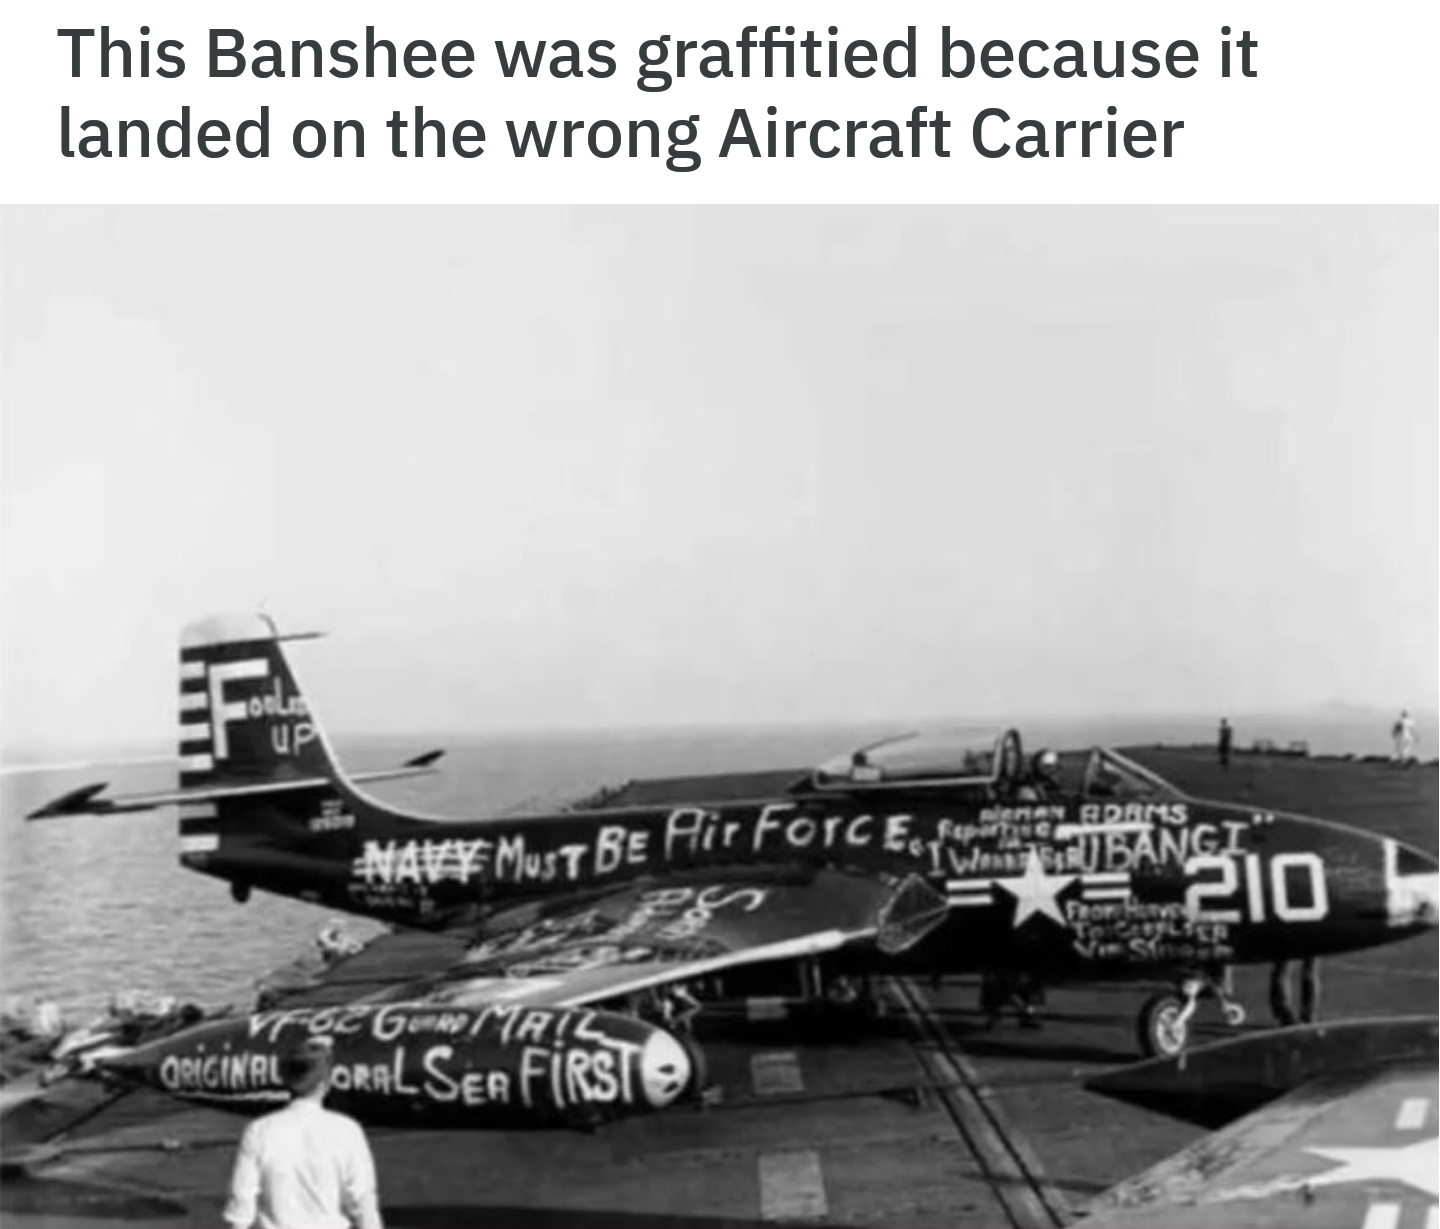 graffiti plane wrong carrier - This Banshee was graffitied because it landed on the wrong Aircraft Carrier Rpen Mut Be Hir Force Ric Oral Ser First